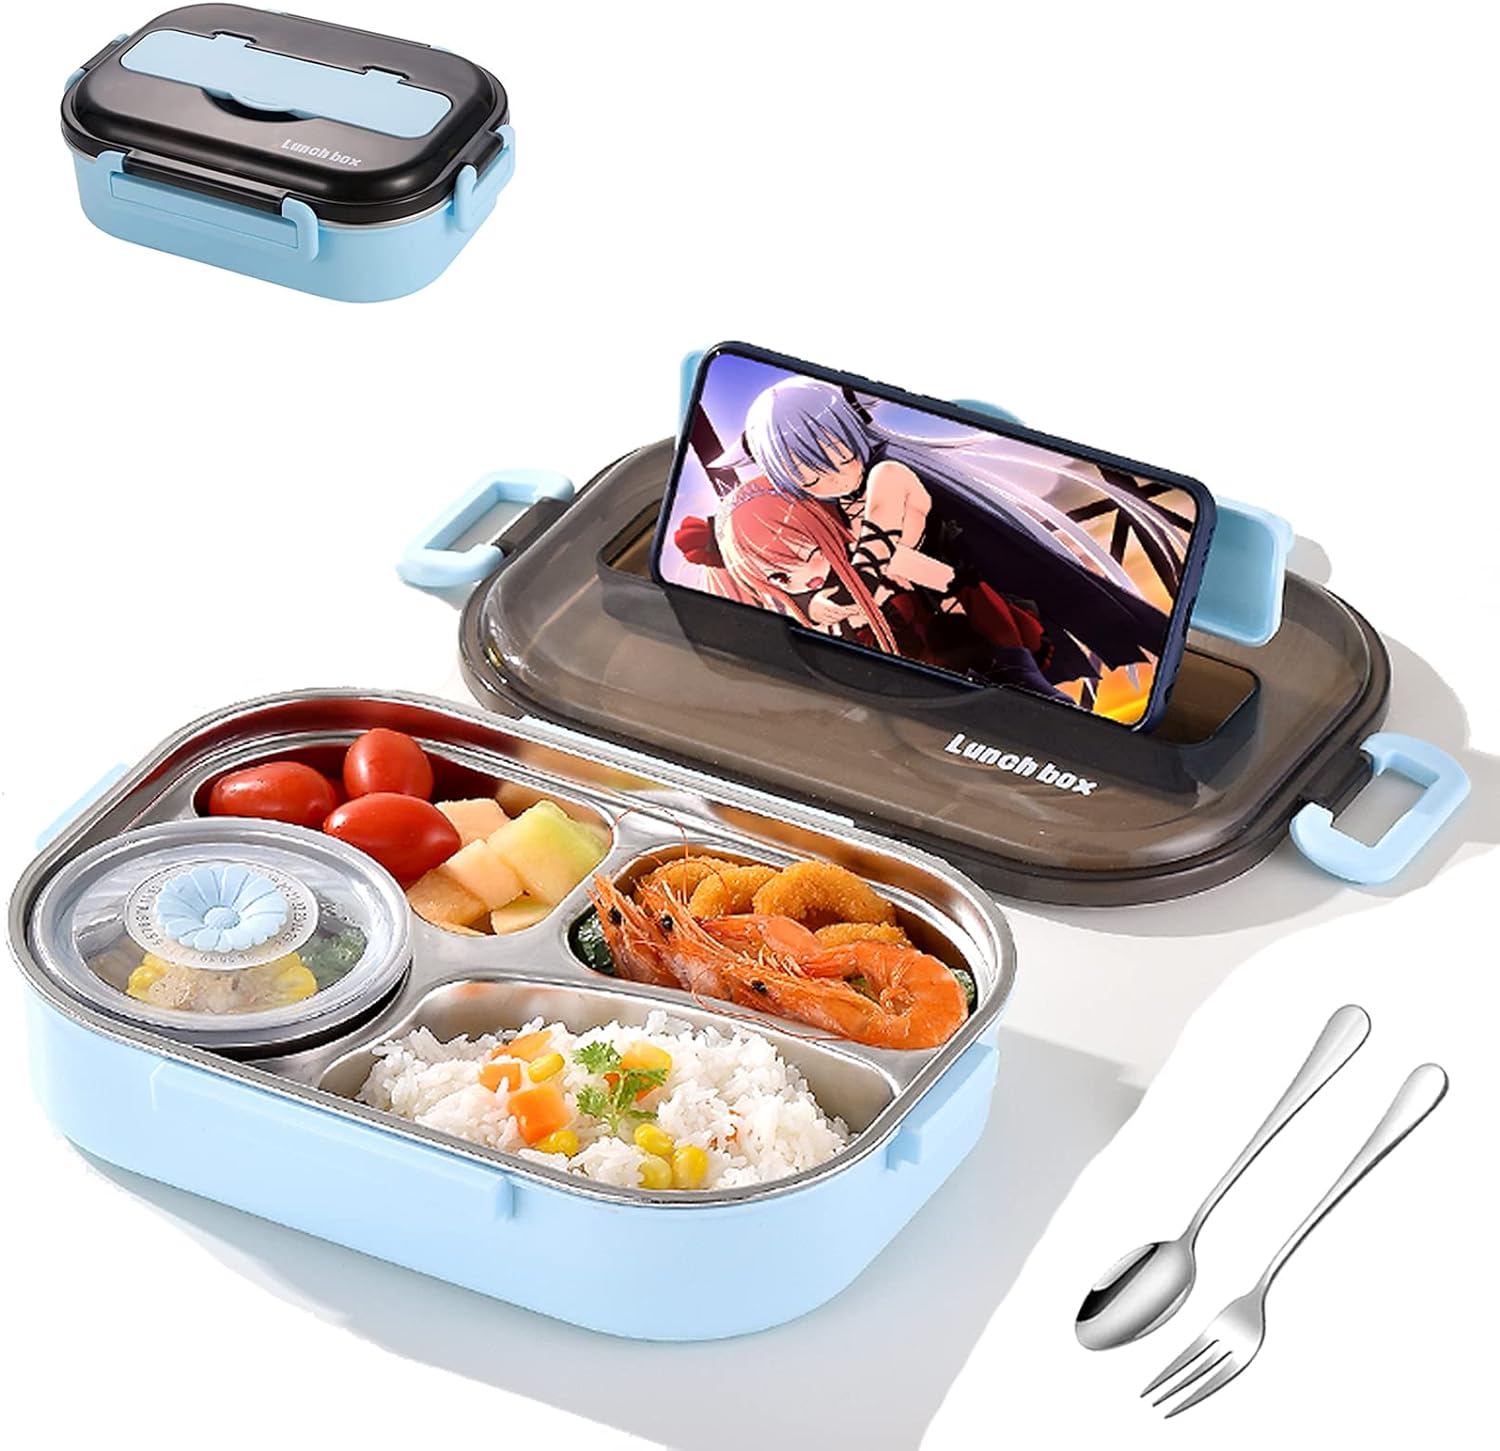 Portable Bento Box for Kids Black Stainless Steel Lunch Box with 4 Compartments